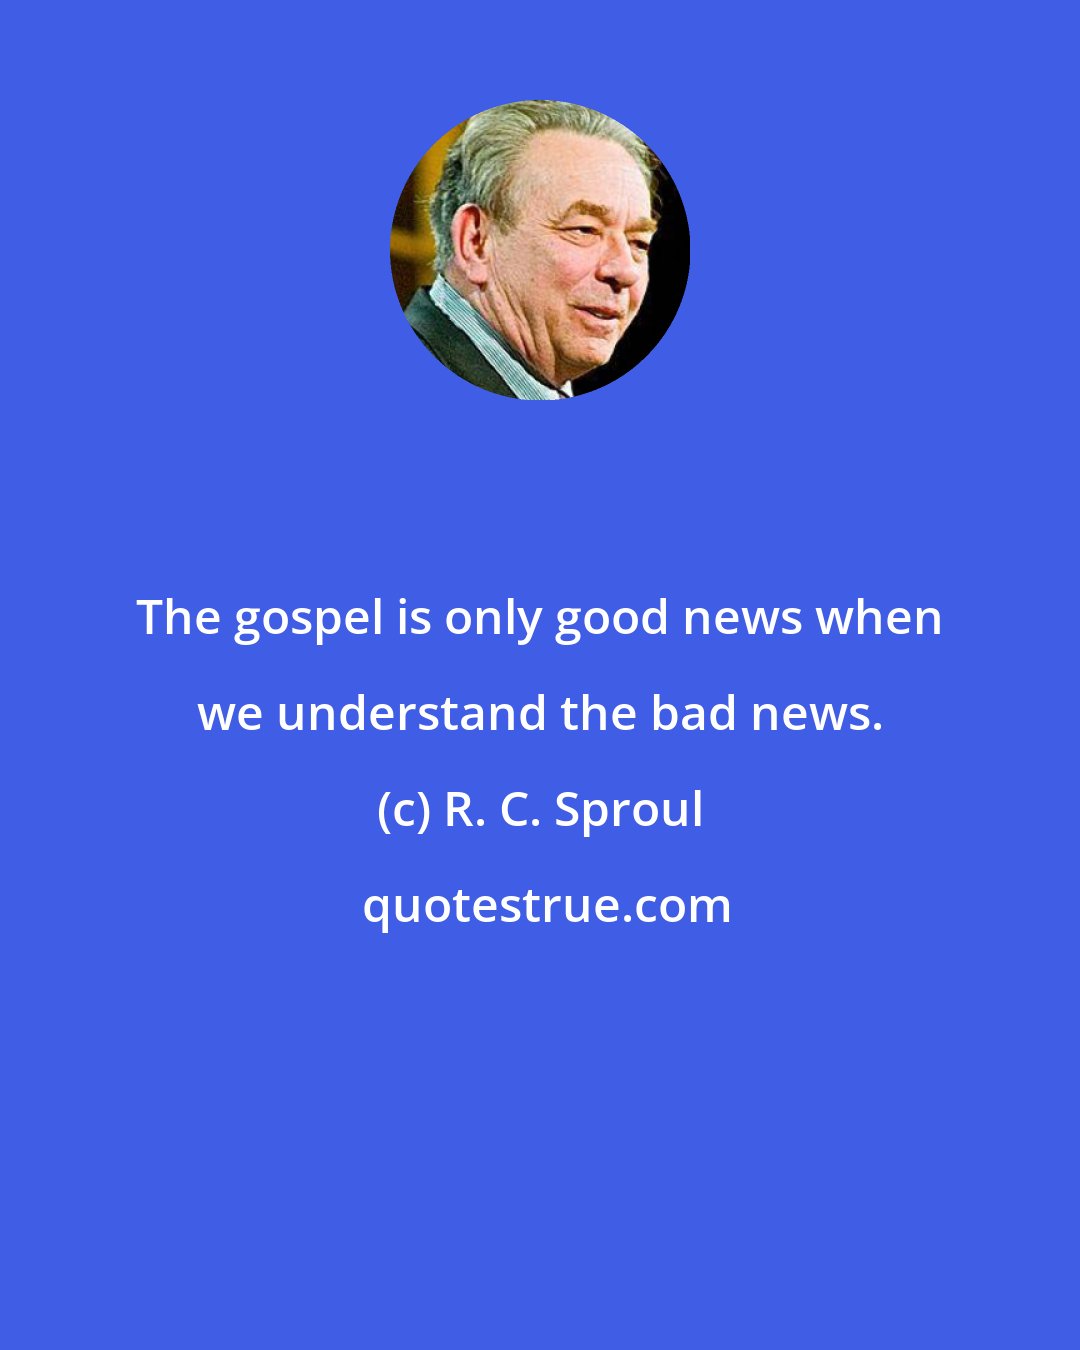 R. C. Sproul: The gospel is only good news when we understand the bad news.